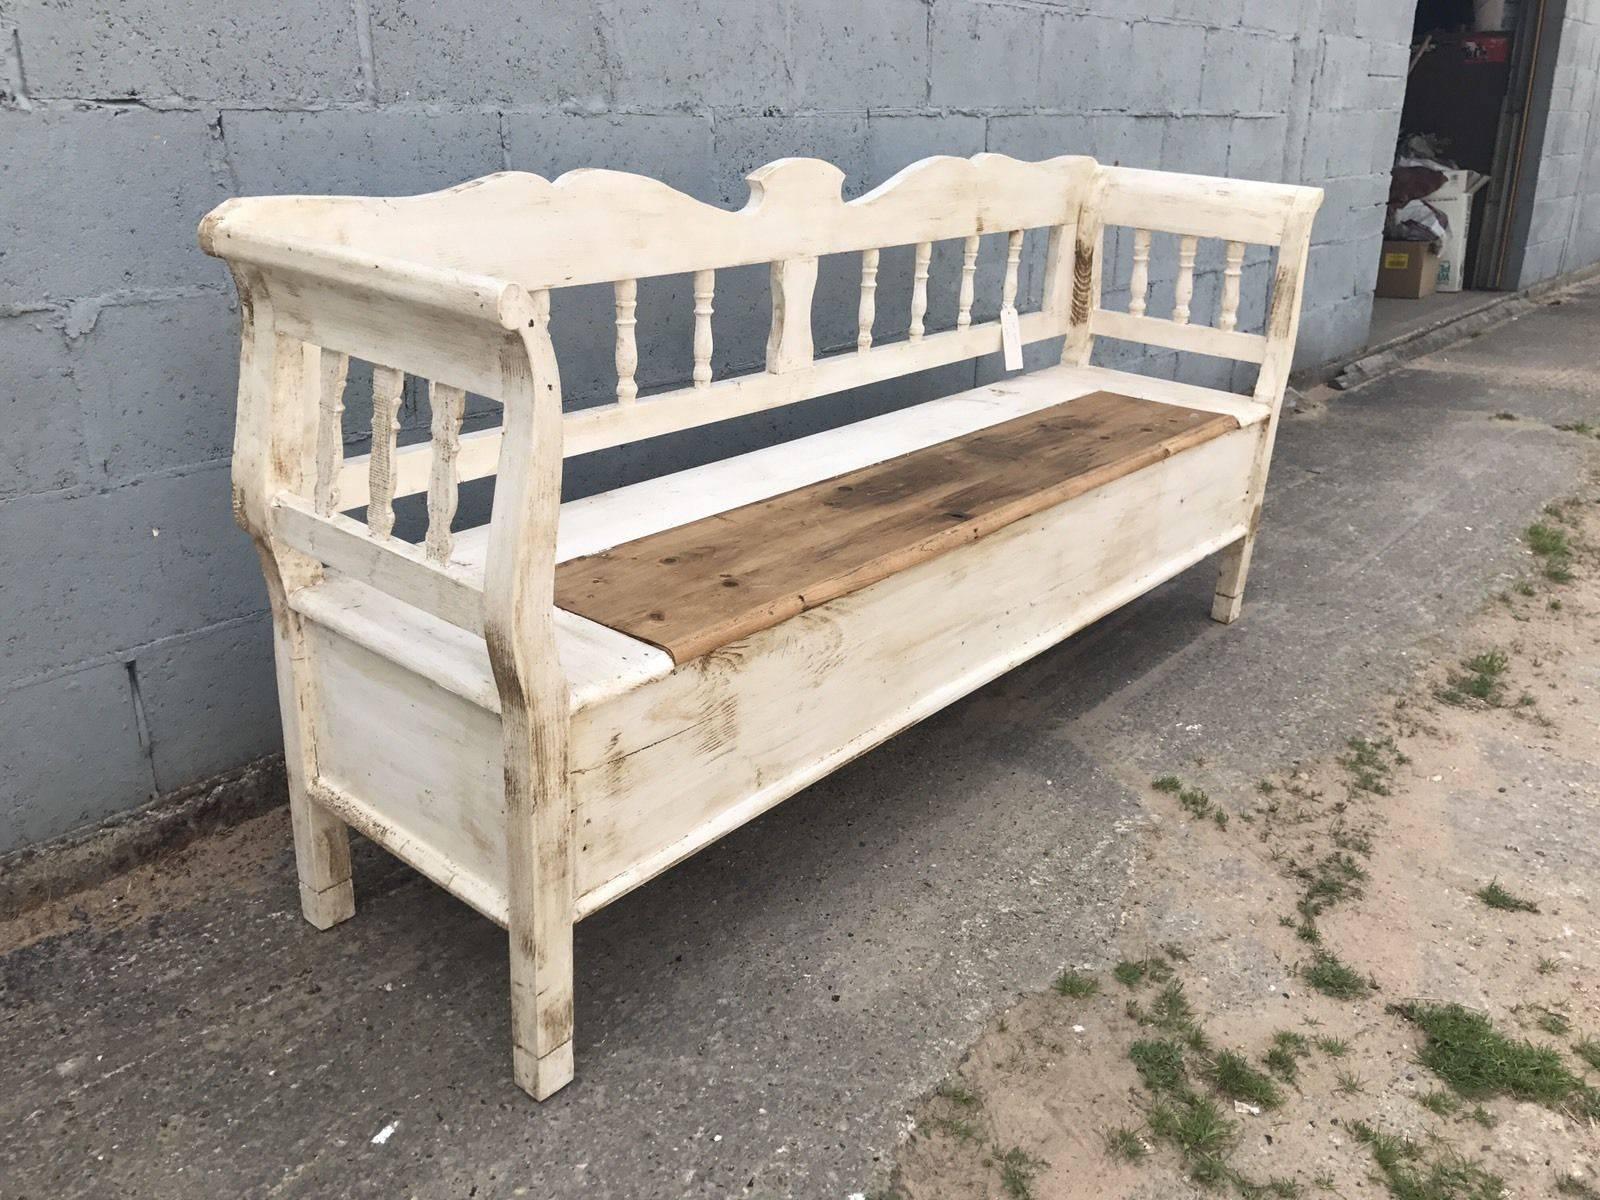 Here we have a lovely oak/pine settle. Great storage space and perfect for a hallway. Can even be used outside! (We have one in our garden).

Dimensions- 195cm long, 97cm tall, 51cm deep

Call for more details.

See my other ads for more